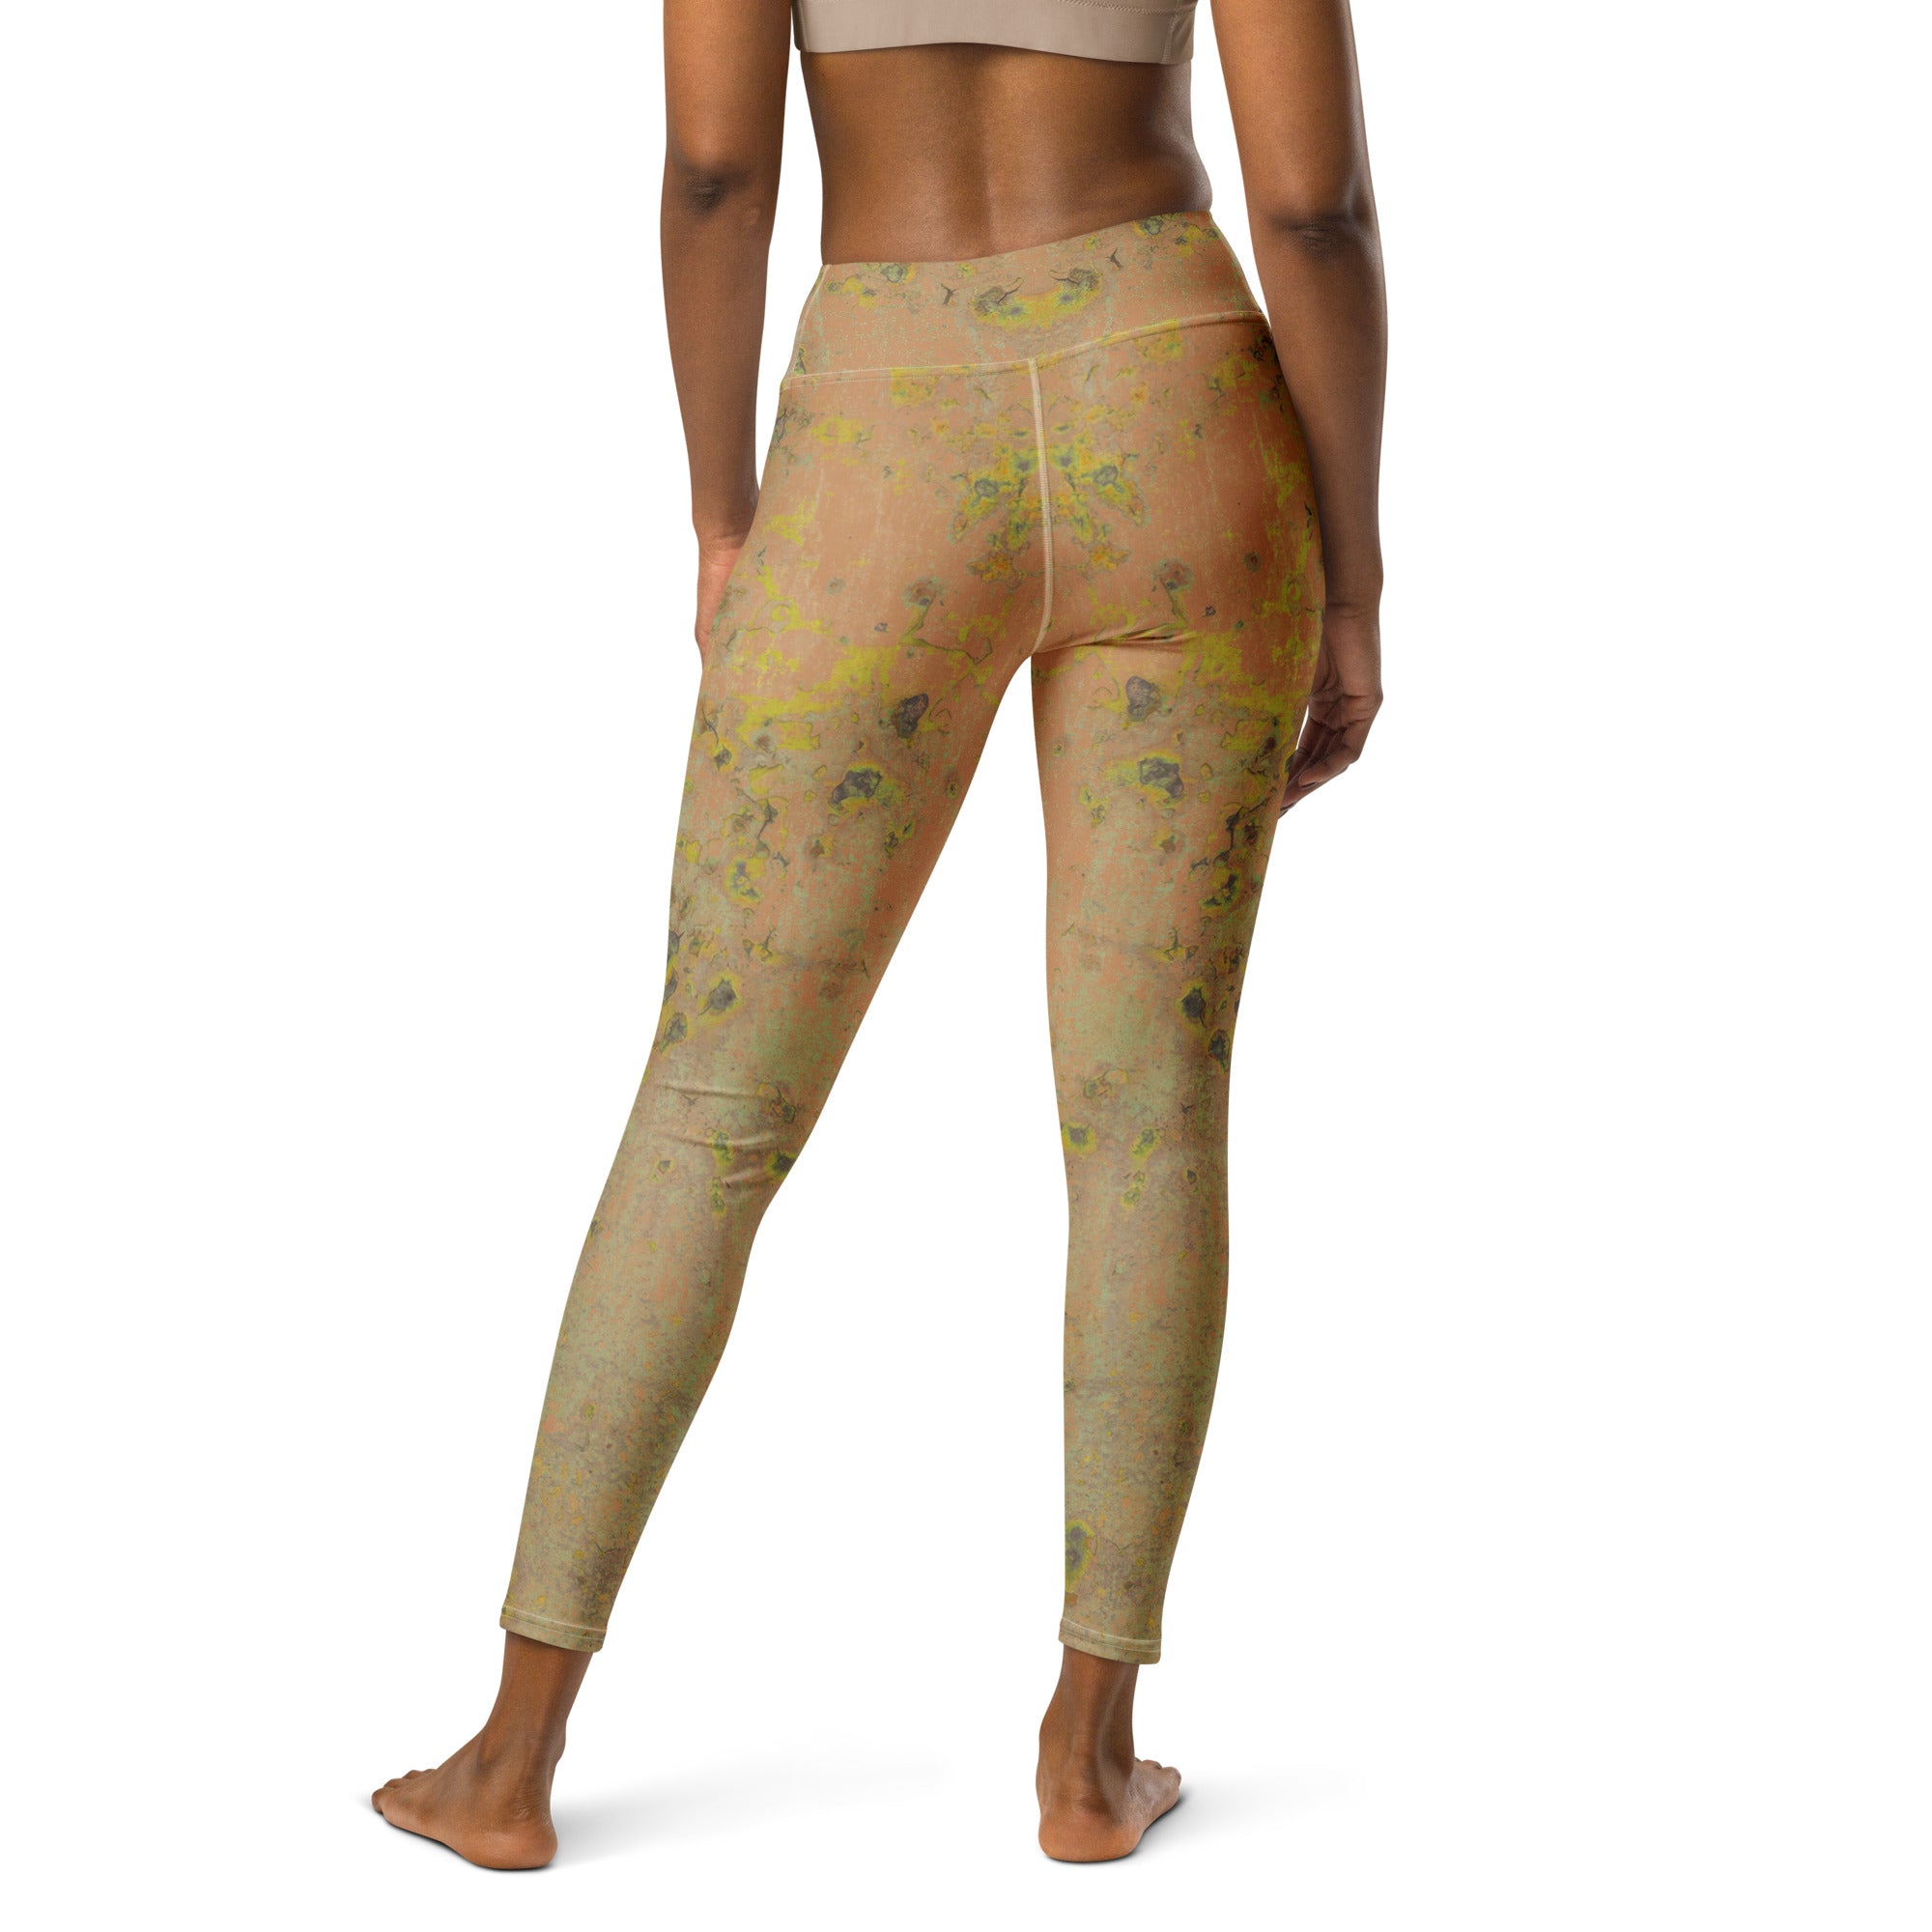 Durable and Flexible Camo Zen Leggings for Yoga and Fitness